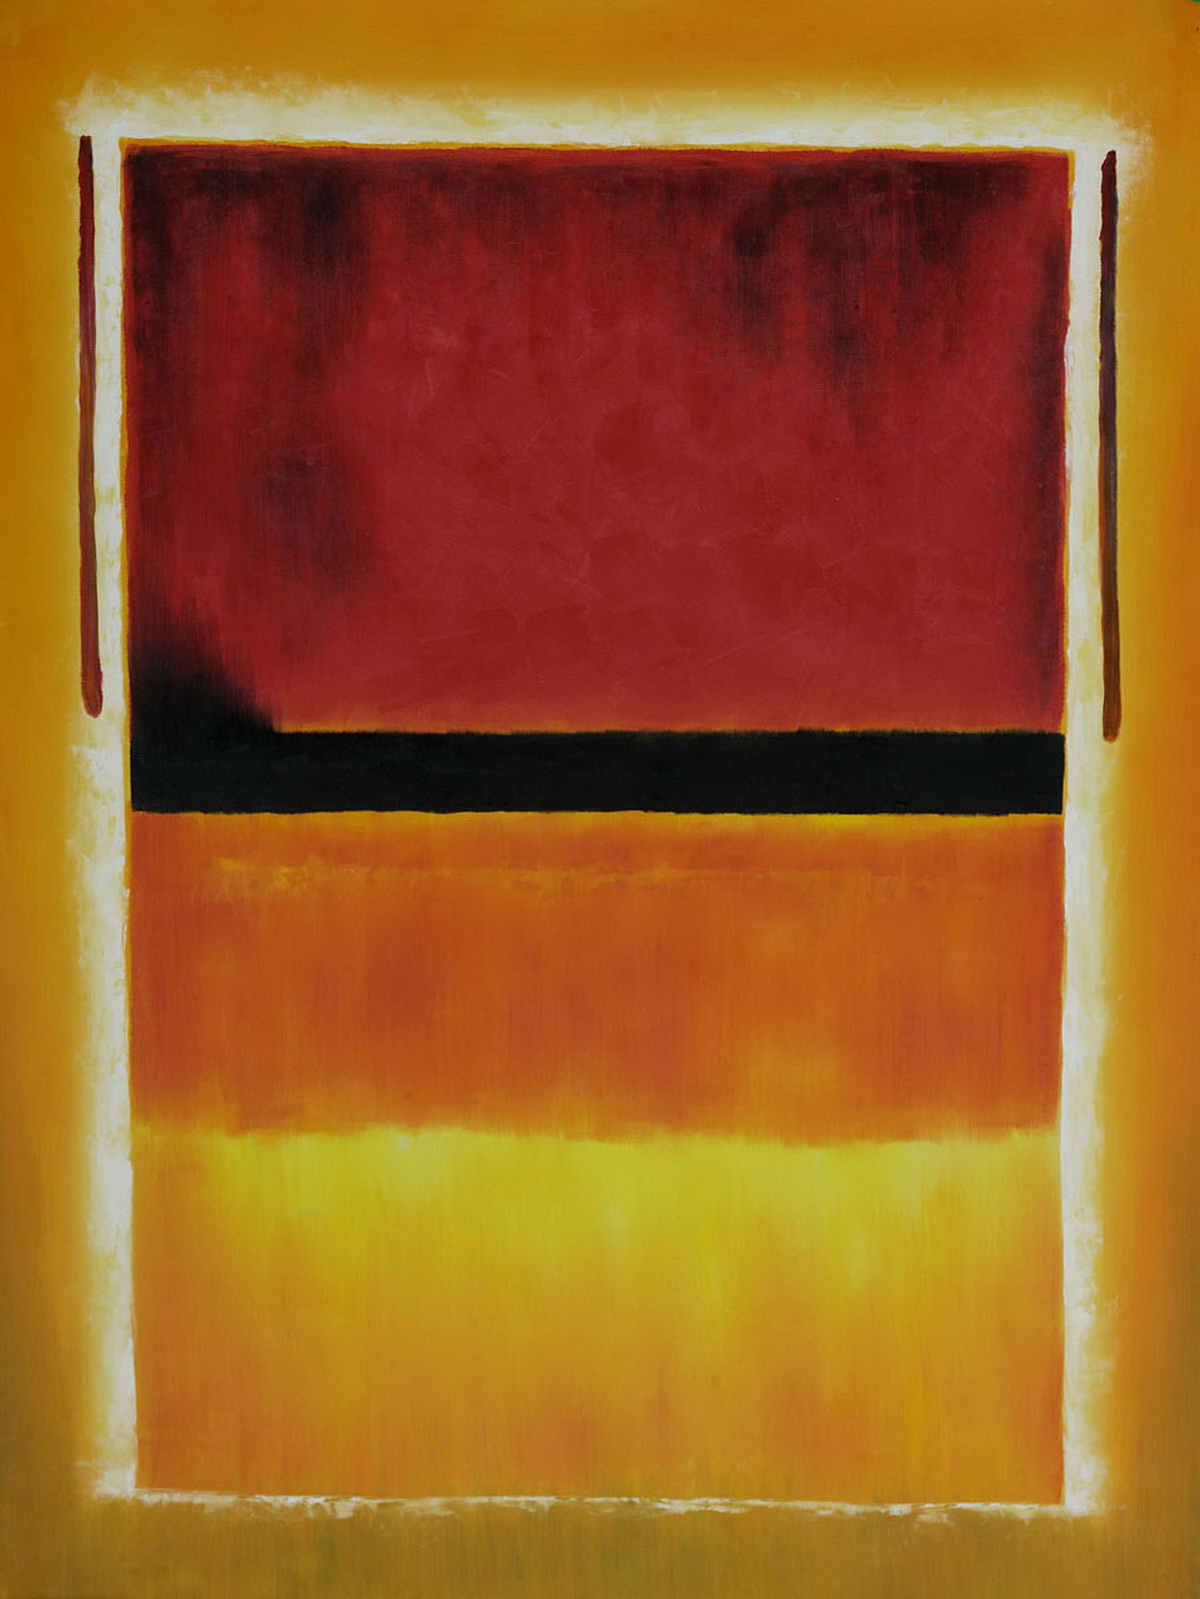 http://s5.picofile.com/file/8115961326/Untitled_1949_by_Mark_Rothko.jpg